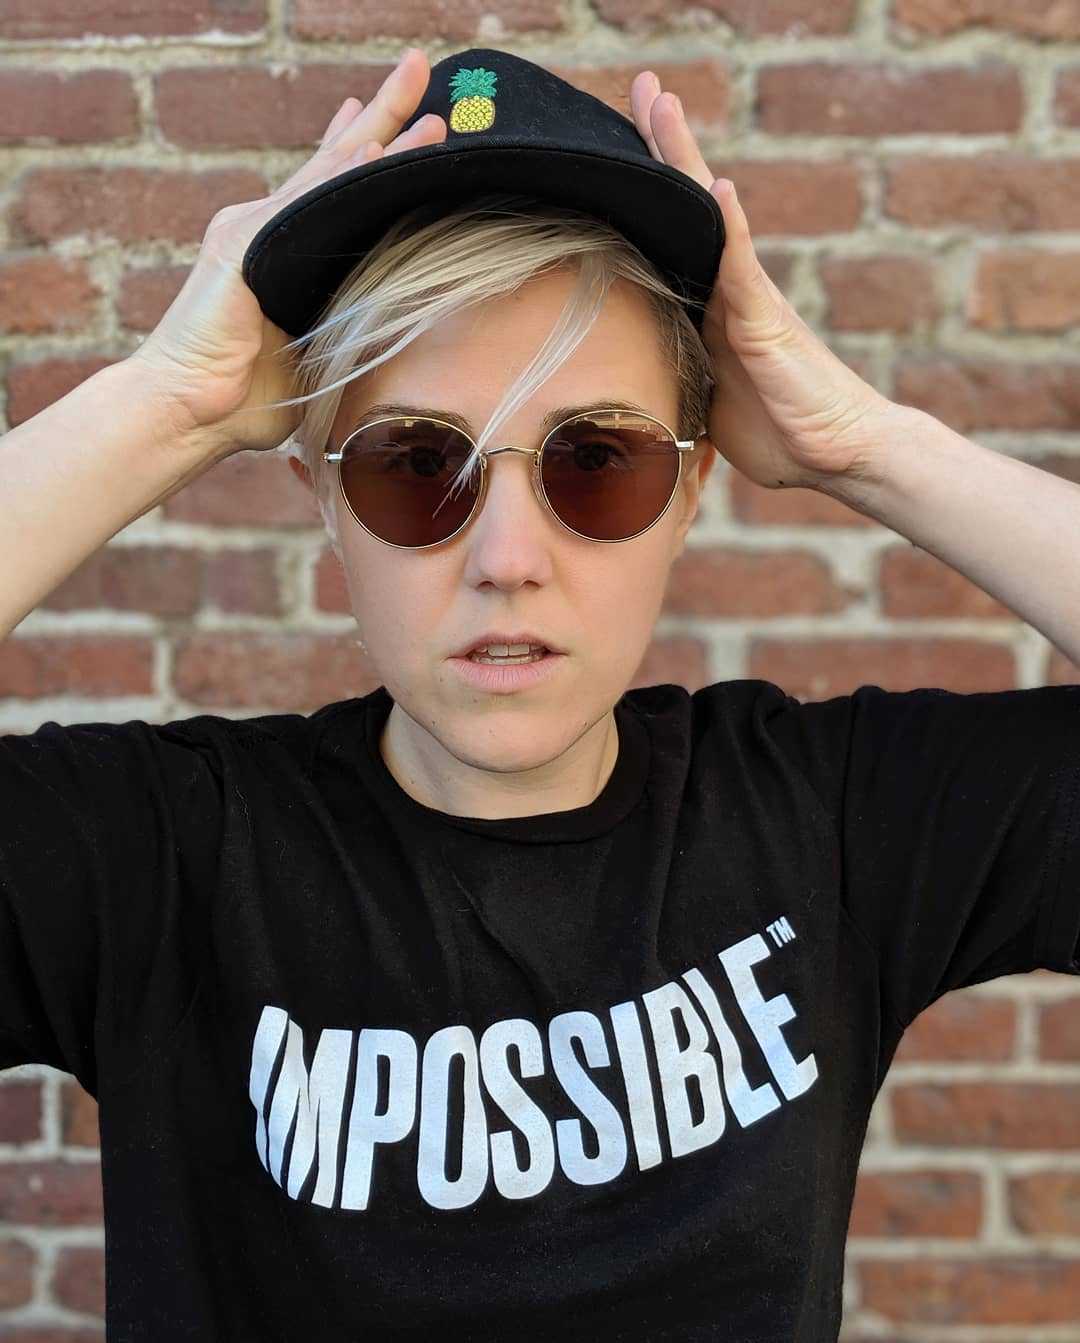 51 Sexy Hannah Hart Boobs Pictures Which Are Inconceivably Beguiling | Best Of Comic Books